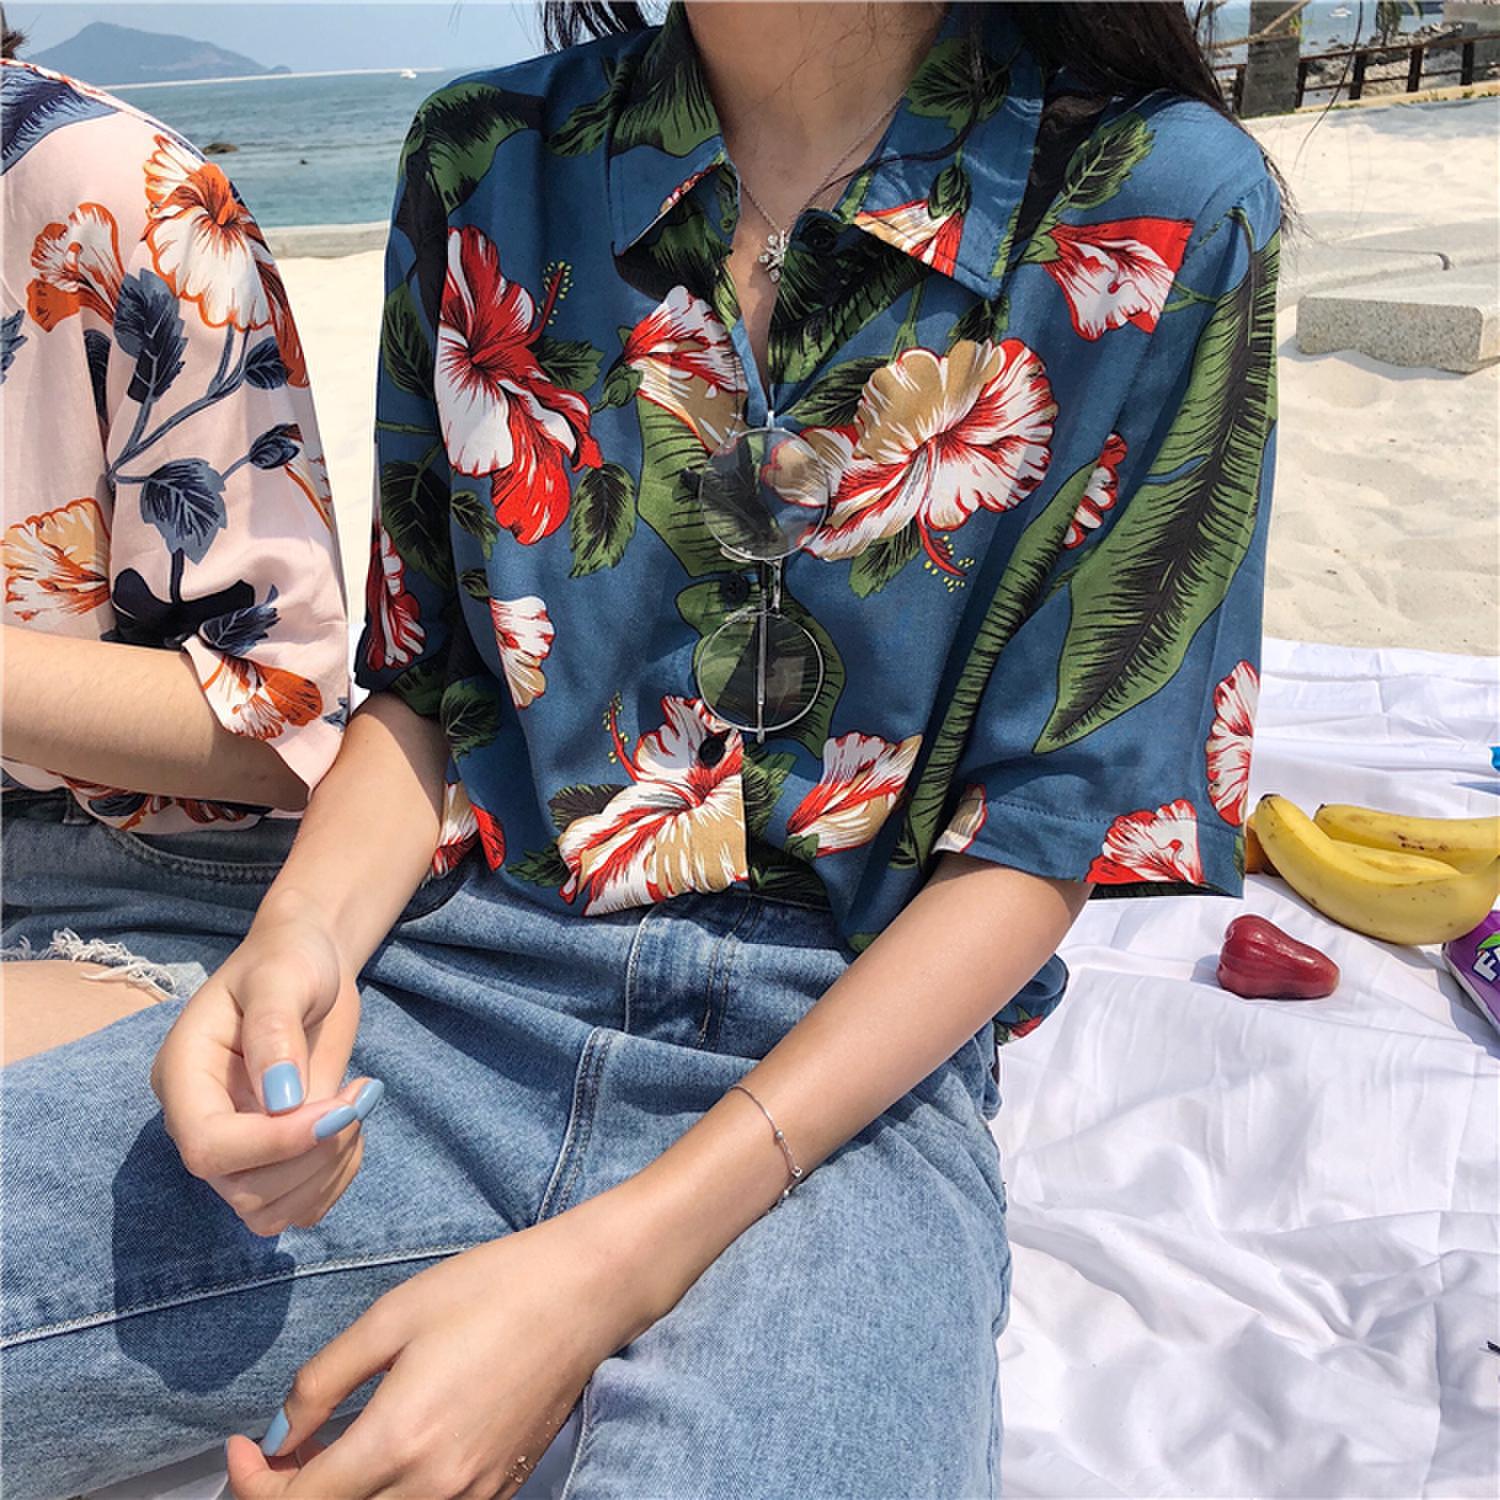 A Generation Hair Women's Net Red Shirt Women's 2020 New Spring And Summer Western Style Retro Printing Short-sleeved Top 8845